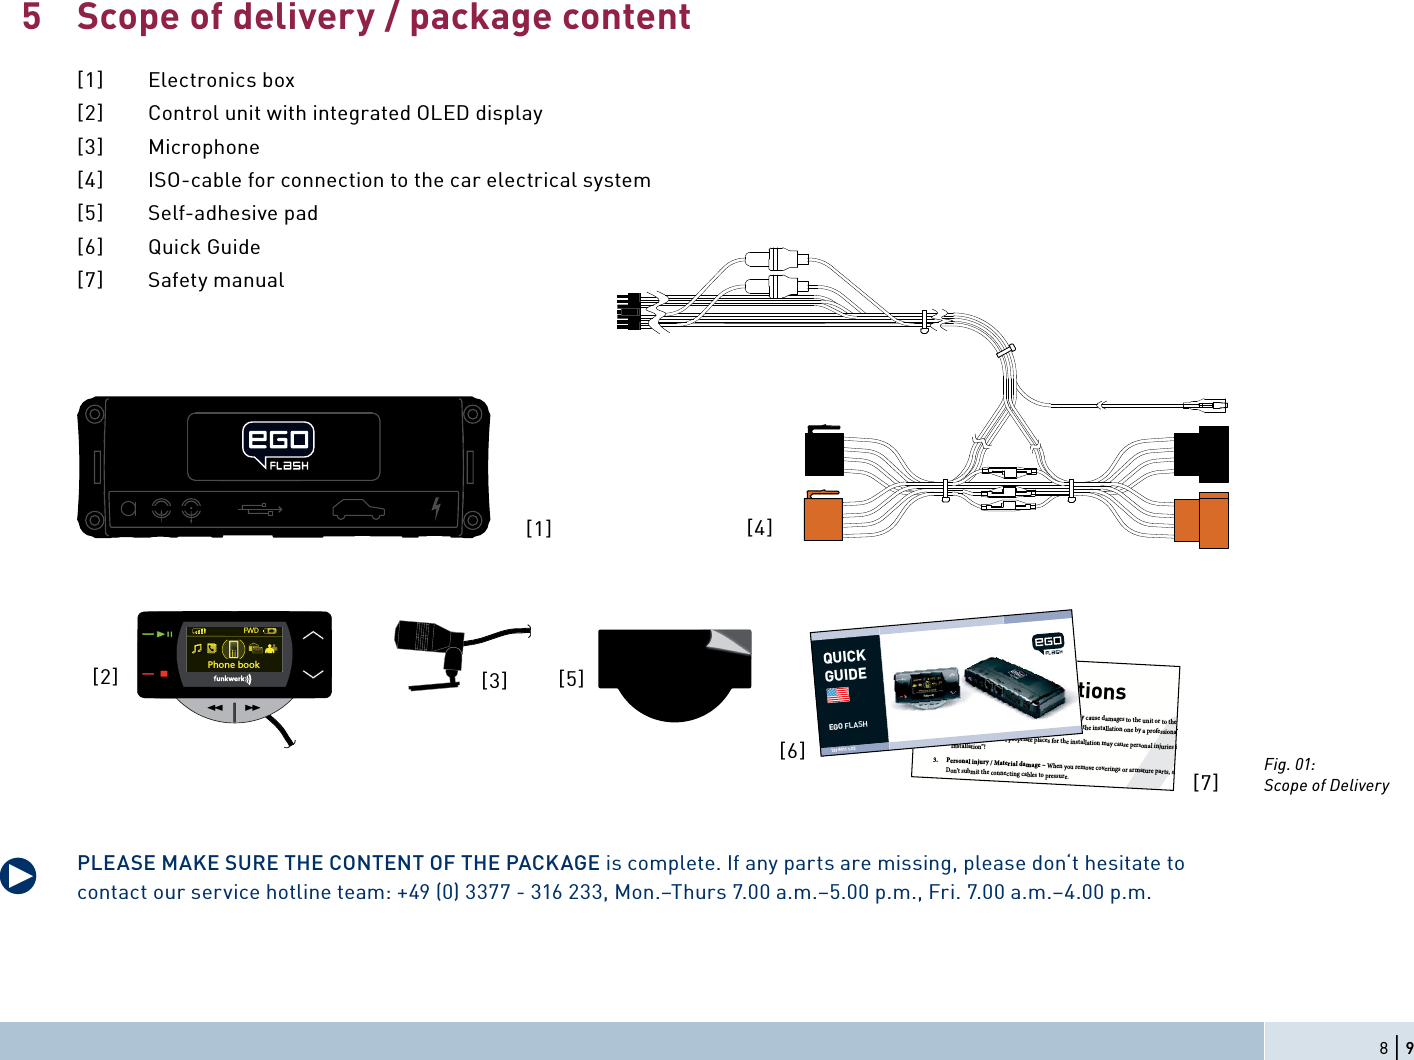 Scope of delivery / package content[1] Electronics box[2]  Control unit with integrated OLED display[3] Microphone[4]  ISO-cable for connection to the car electrical system[5] Self-adhesive pad[6] Quick Guide[7] Safety manualPLEASE MAKE SURE THE CONTENT OF THE PACKAGE is complete. If any parts are missing, please don‘t hesitate to contact our service hotline team: +49 (0) 3377 - 316 233, Mon.–Thurs 7.00 a.m.–5.00 p.m., Fri. 7.00 a.m.–4.00 p.m.5q8 | 9[1][2] [3]FWDPhone bookSafety Instructions1. Improper installation – Improper installation may cause damages to the unit or to the v  abilities. We therefore strongly recommend to have the installation one by a professional.2. Personal injury – Inappropriate places for the installation may cause personal injuries in  “Installation”!3. Personal injury / Material damage – When you remove coverings or armature parts, sha Don’t submit the connecting cables to pressure.4. Negative eects on road safety – Ta lking whil t d i[6][7]QUICKGUIDEEGO FLASH129 8011 1.02[4]Fig. 01:Scope of Delivery[5]